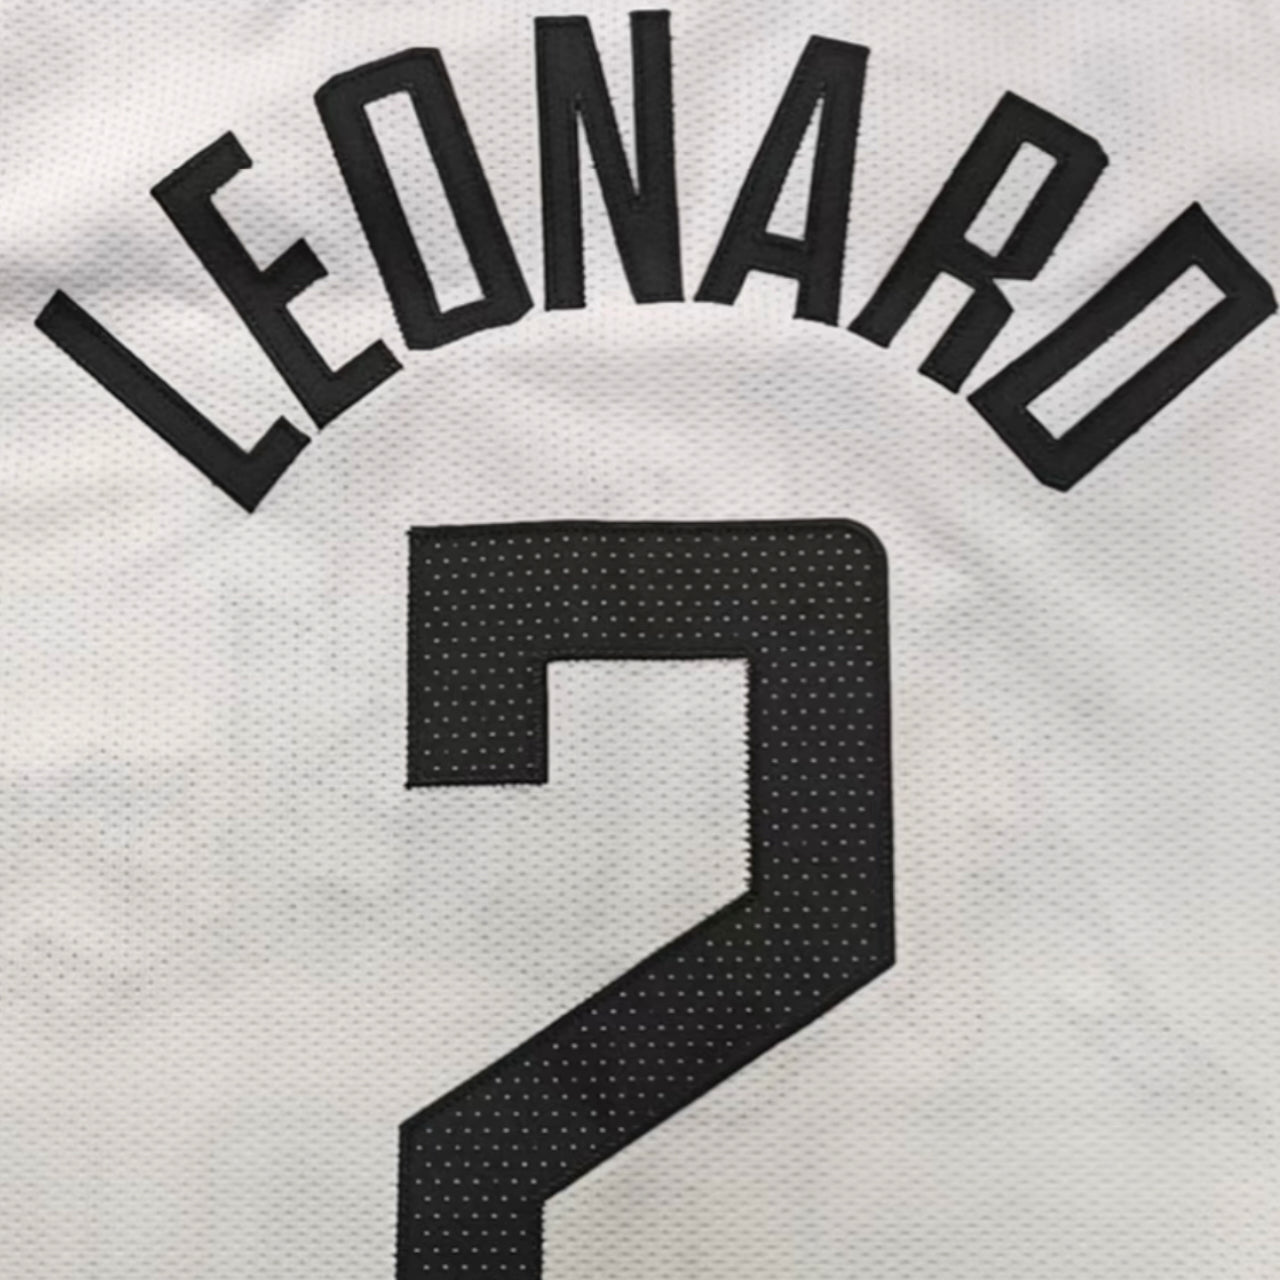 Kawhi Leonard Los Angeles Clippers 2019-2020 City Edition Nike Authentic Jersey - White/Black - Hoop Jersey Store